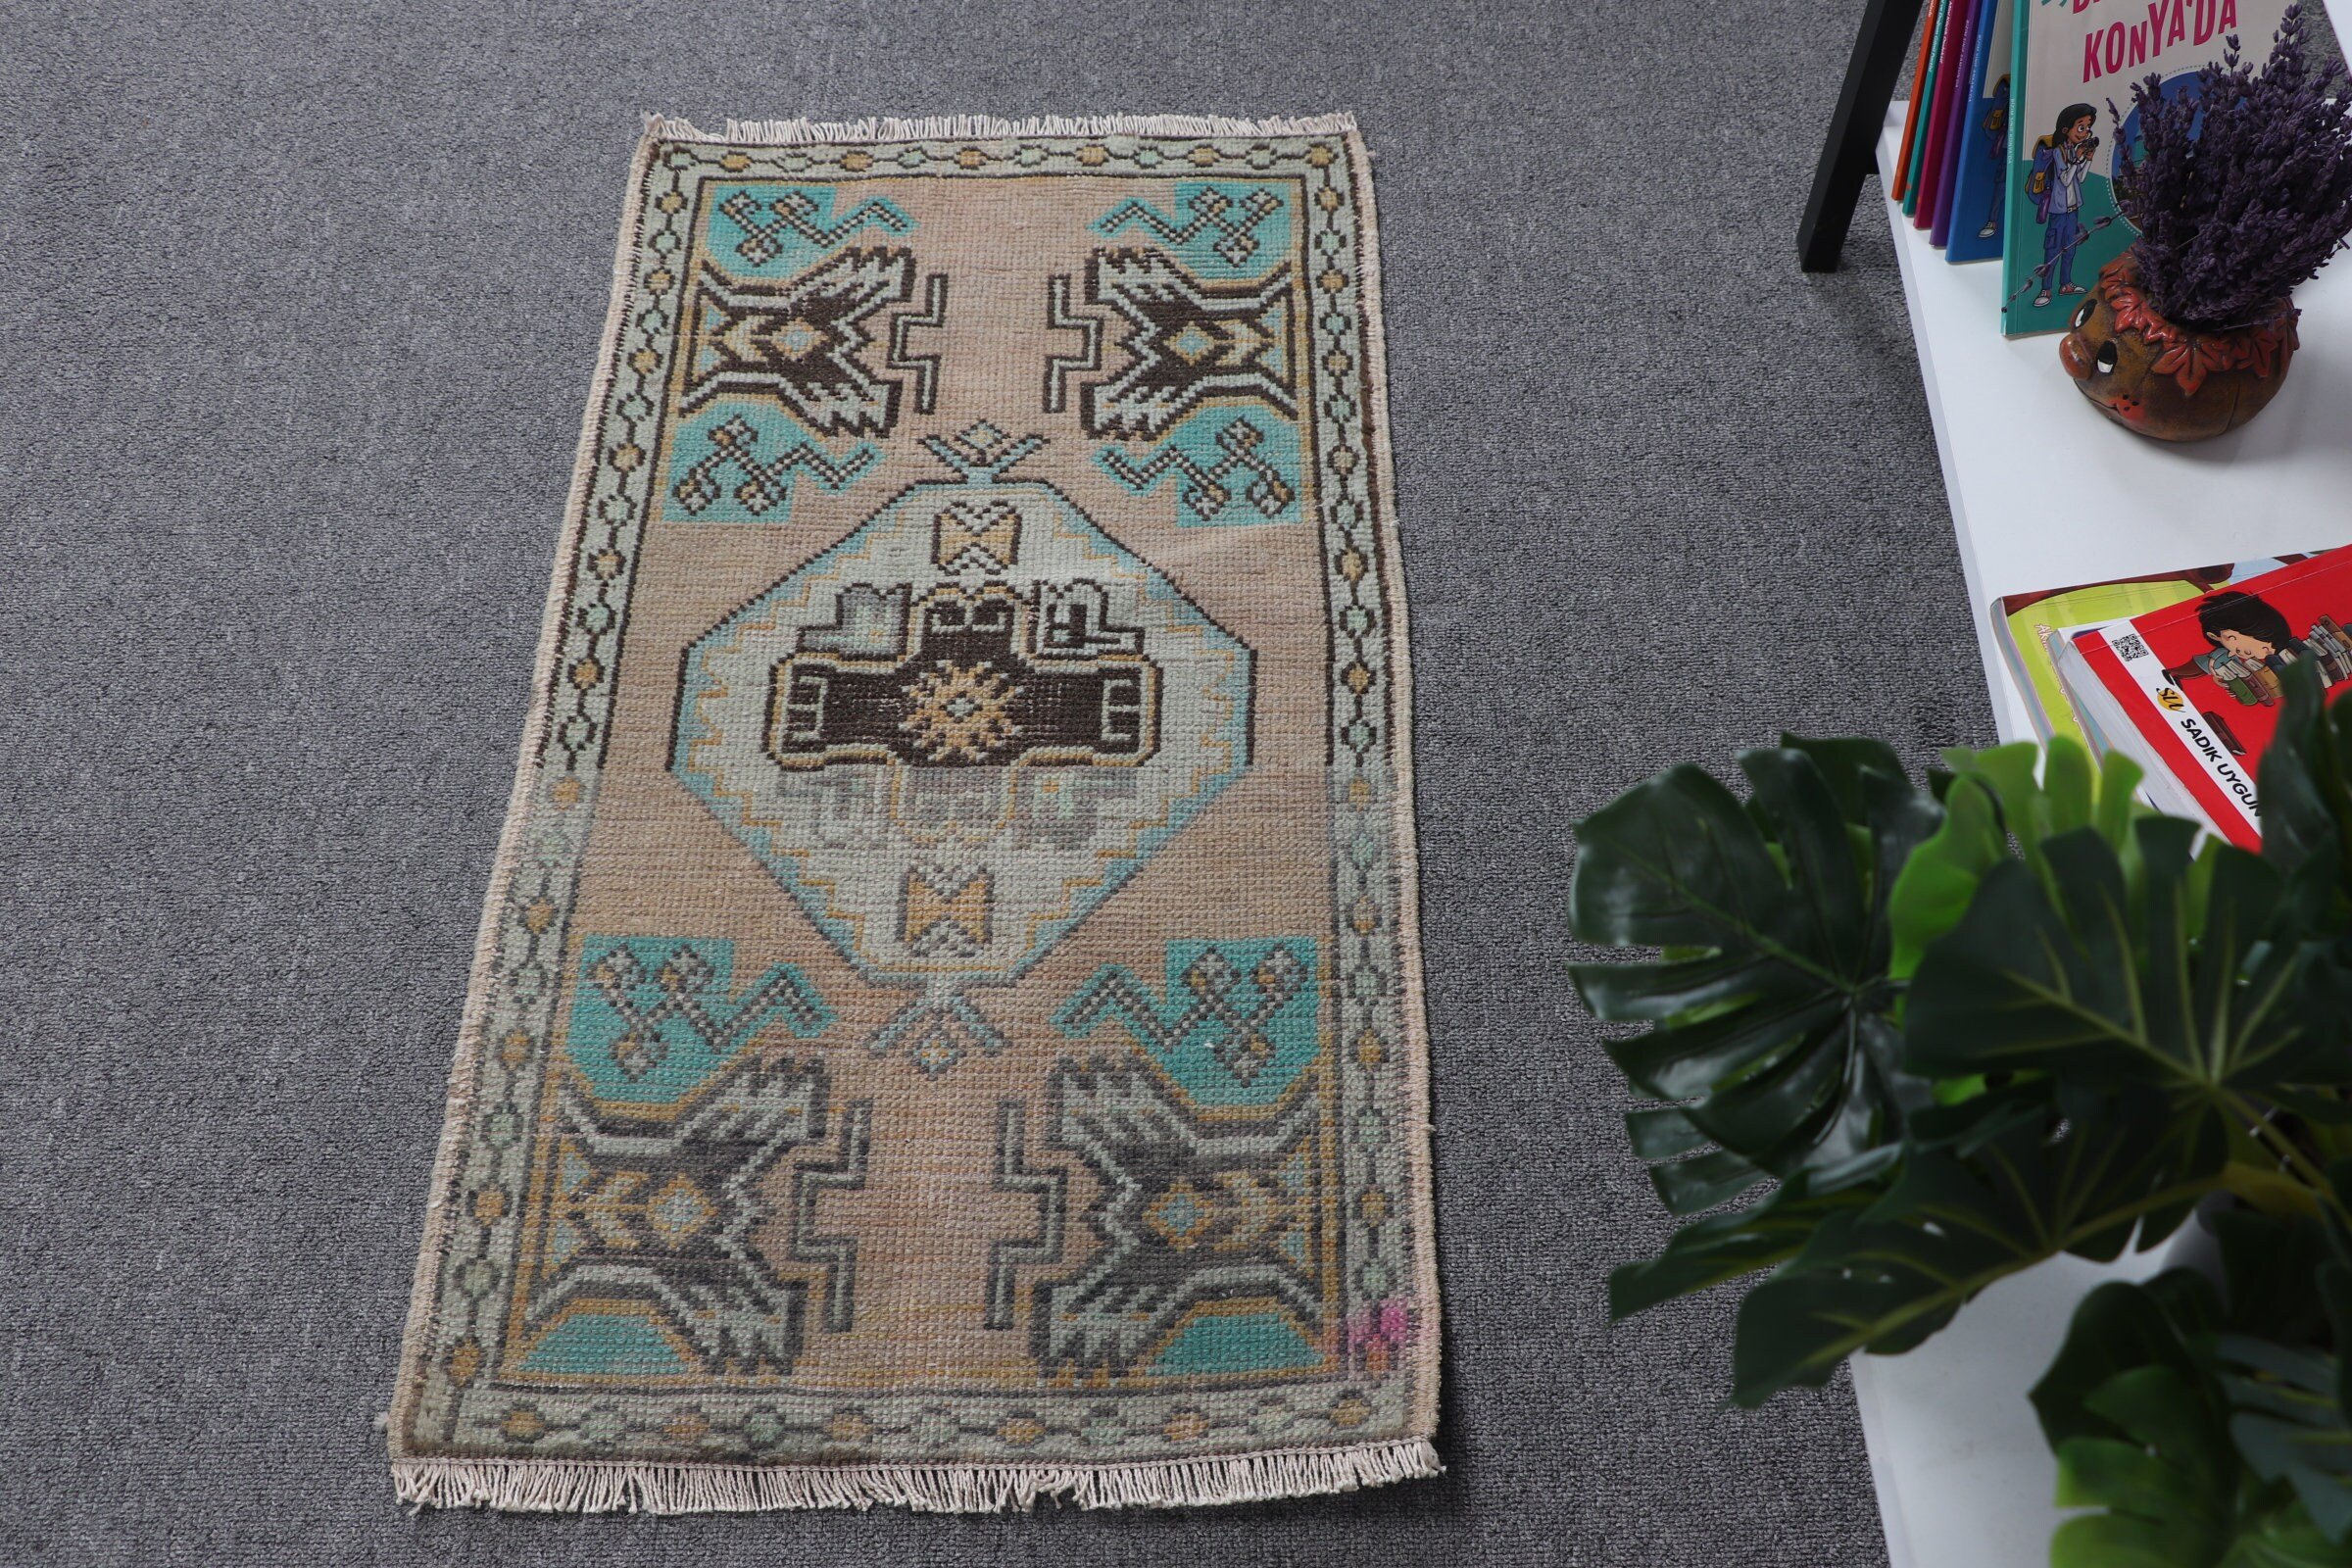 Wall Hanging Rug, Vintage Rug, Kitchen Rugs, Home Decor Rug, Moroccan Rugs, Turkish Rugs, Bronze  1.5x2.7 ft Small Rug